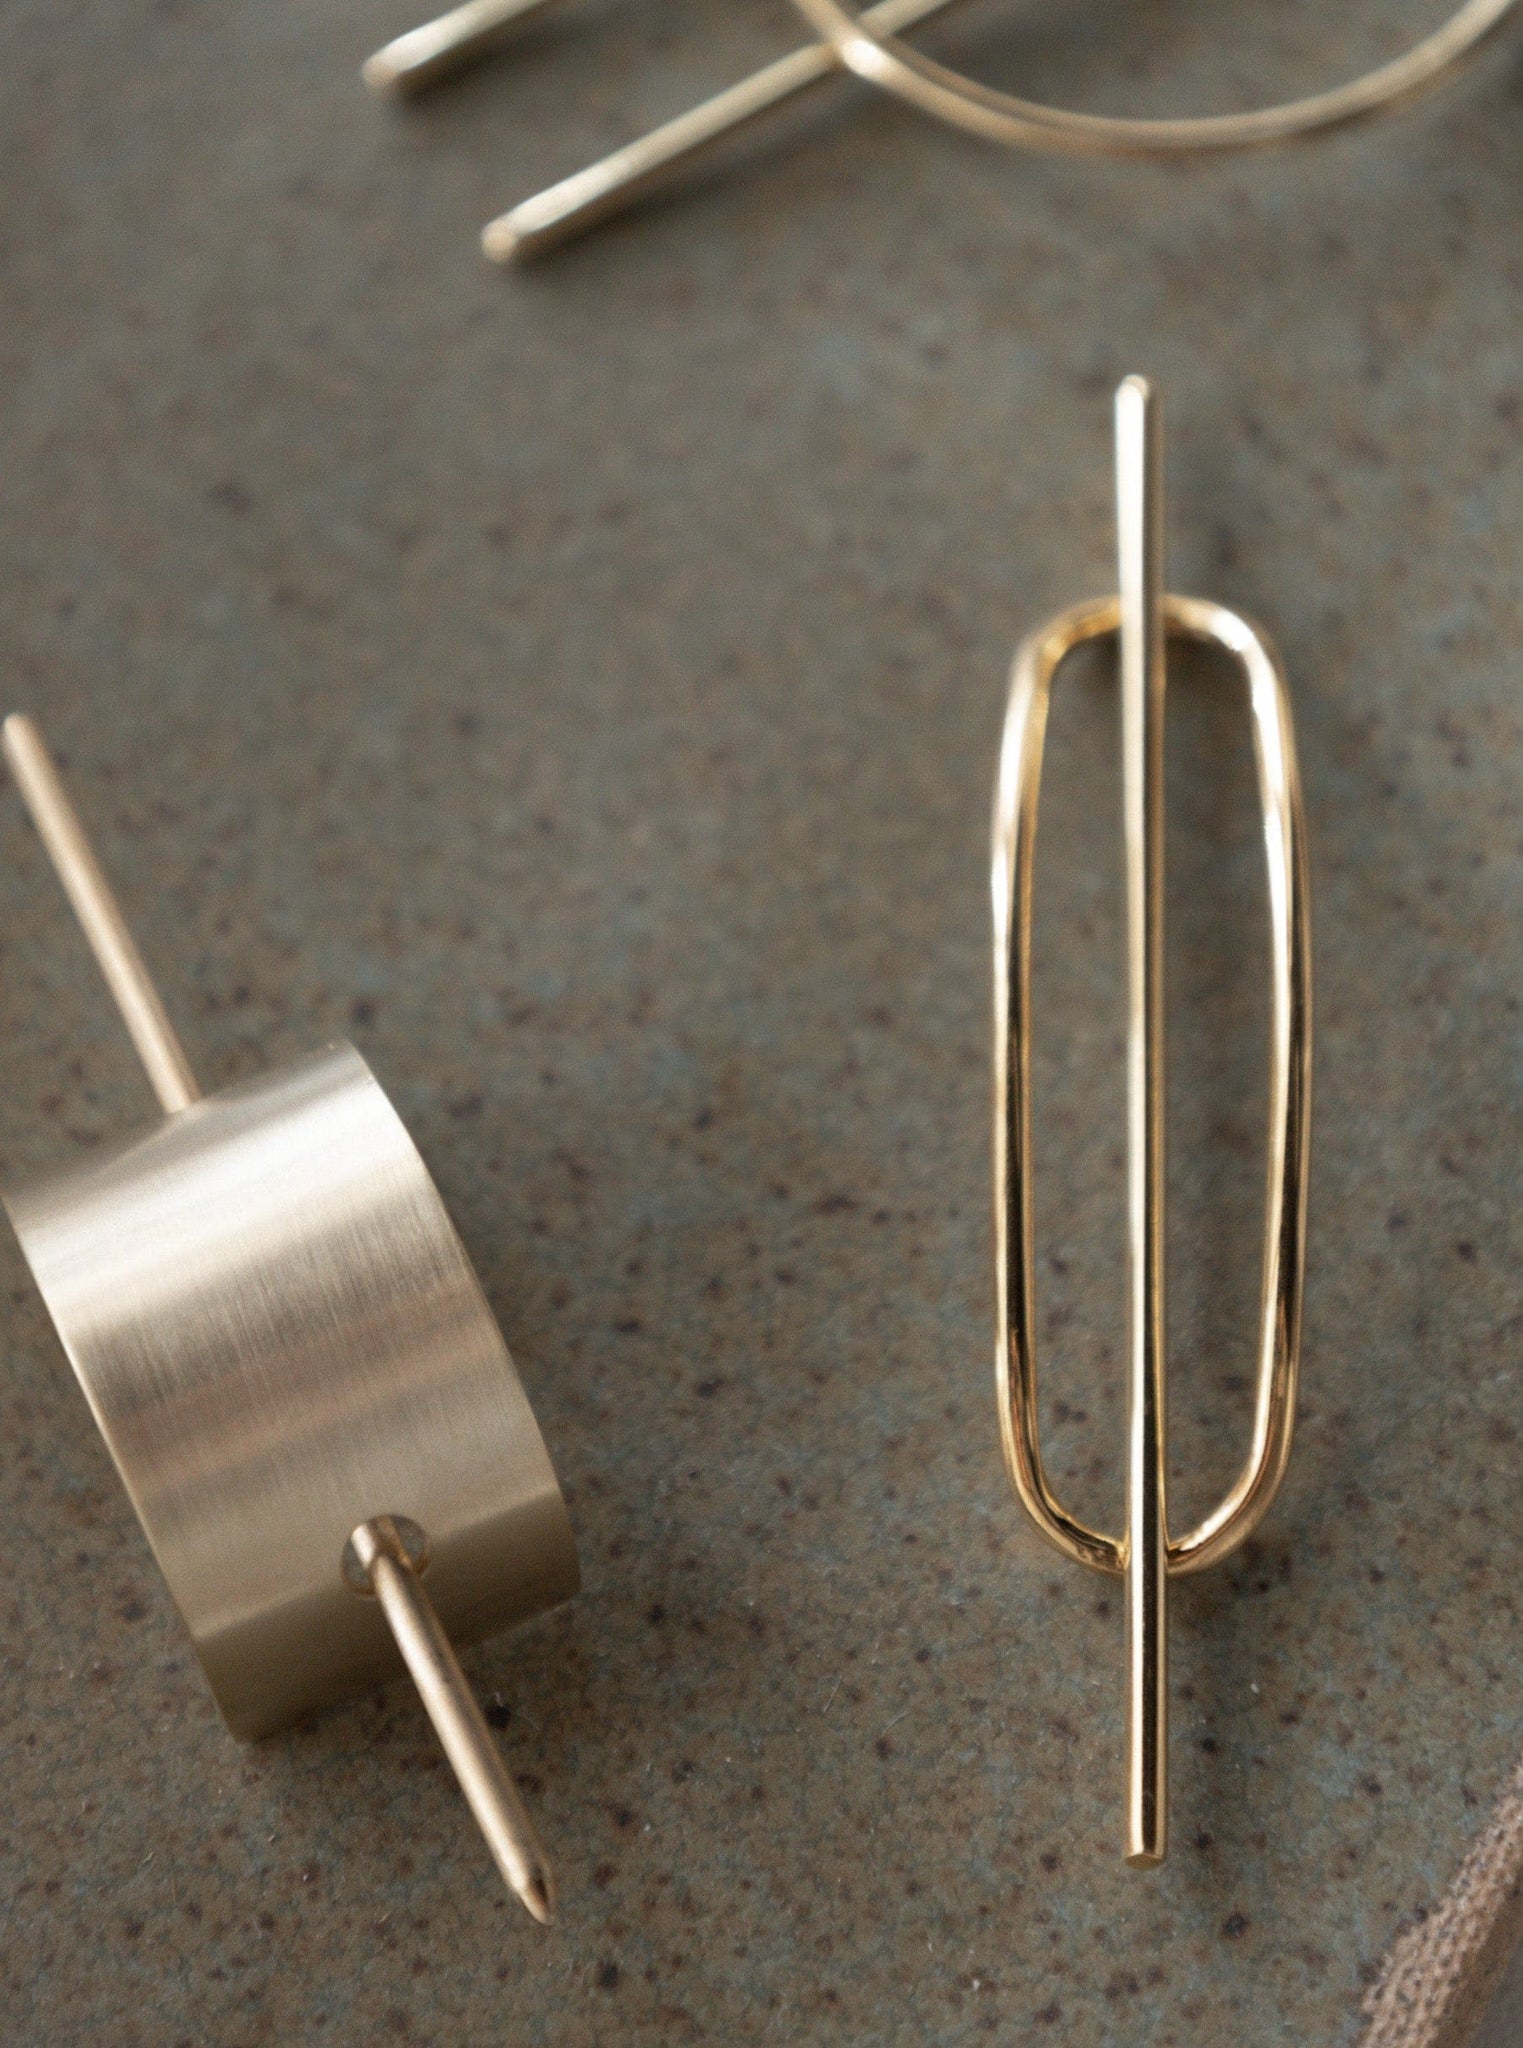 A pair of Petite Oval Hair Pin - pre-order on a table.